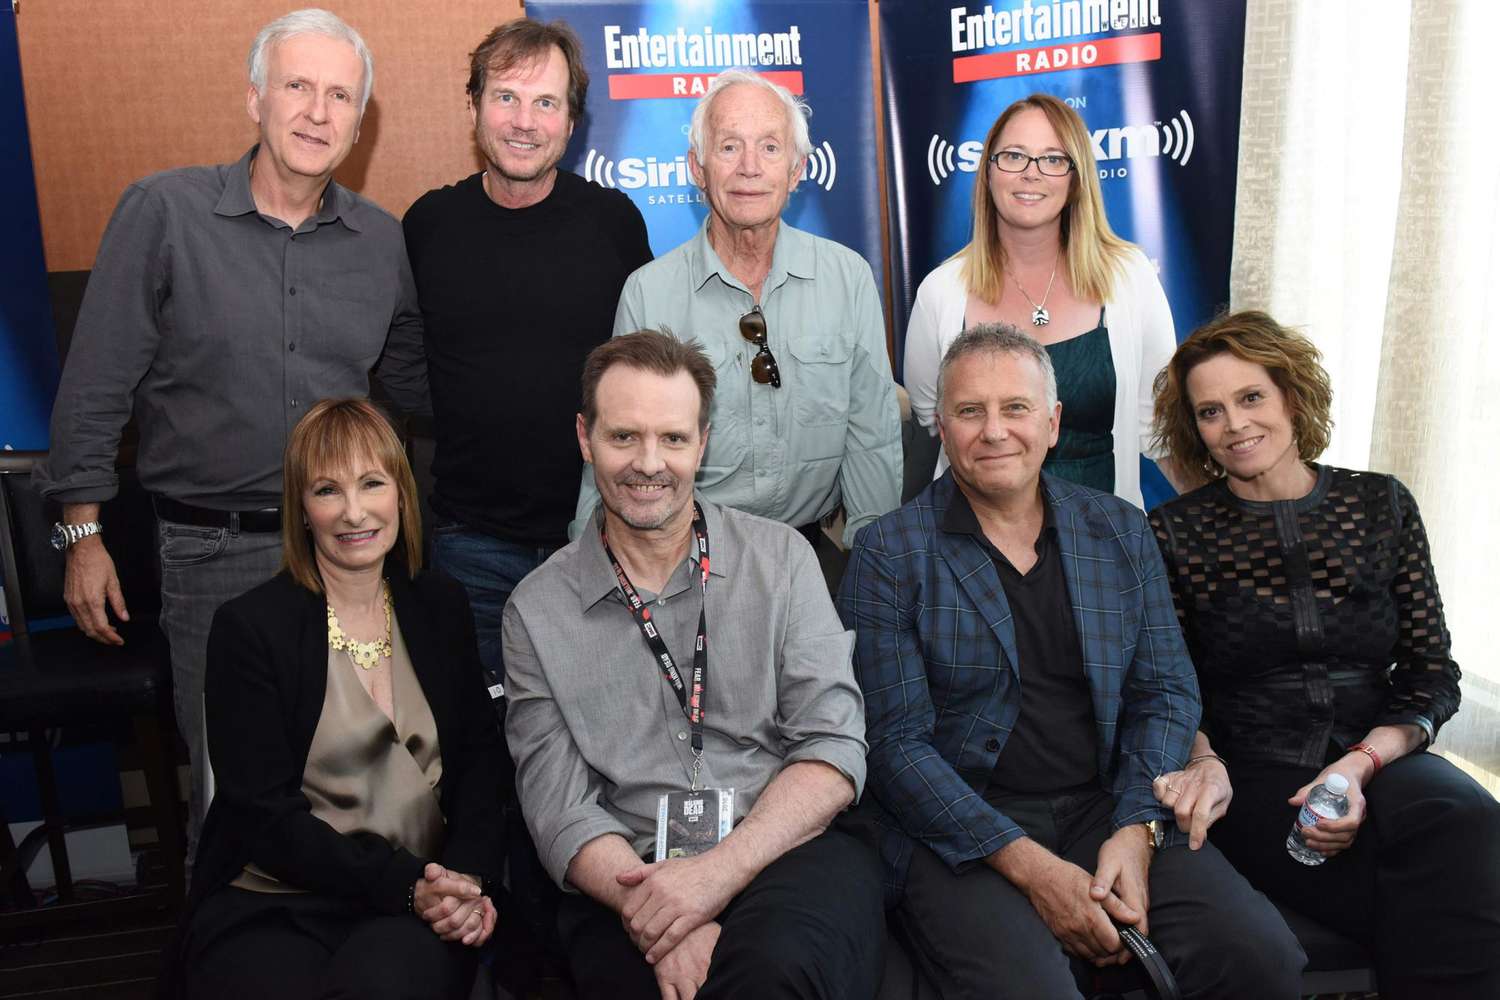 Bill Paxton With James Cameron , Lance Henriksen, Carrie Henn, Gale Anne Hurd, Michael Biehn, Paul Reiser, and Sigourney Weaver at SiriusXM's Entertainment Weekly Radio Channel Broadcast From Comic-Con on&nbsp;July 22, 2016